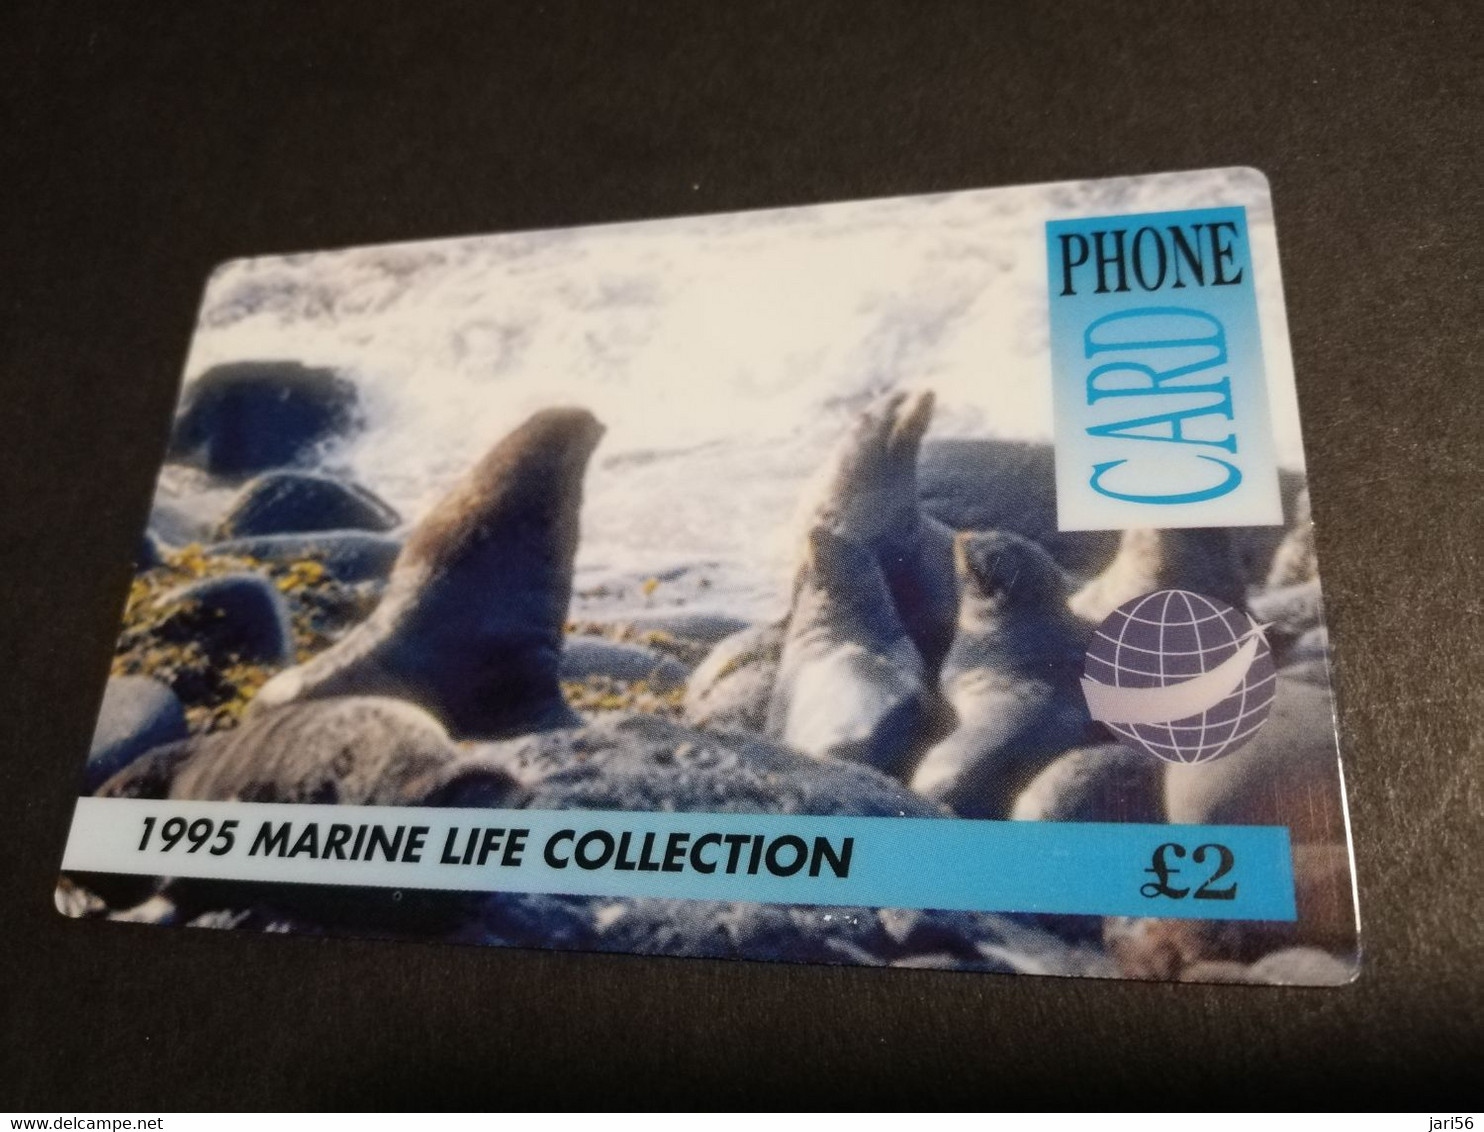 GREAT BRITAIN   2 POUND   MARINE LIFE COLLECTION SEALION     DIT PHONECARD    PREPAID CARD      **5925** - [10] Collections